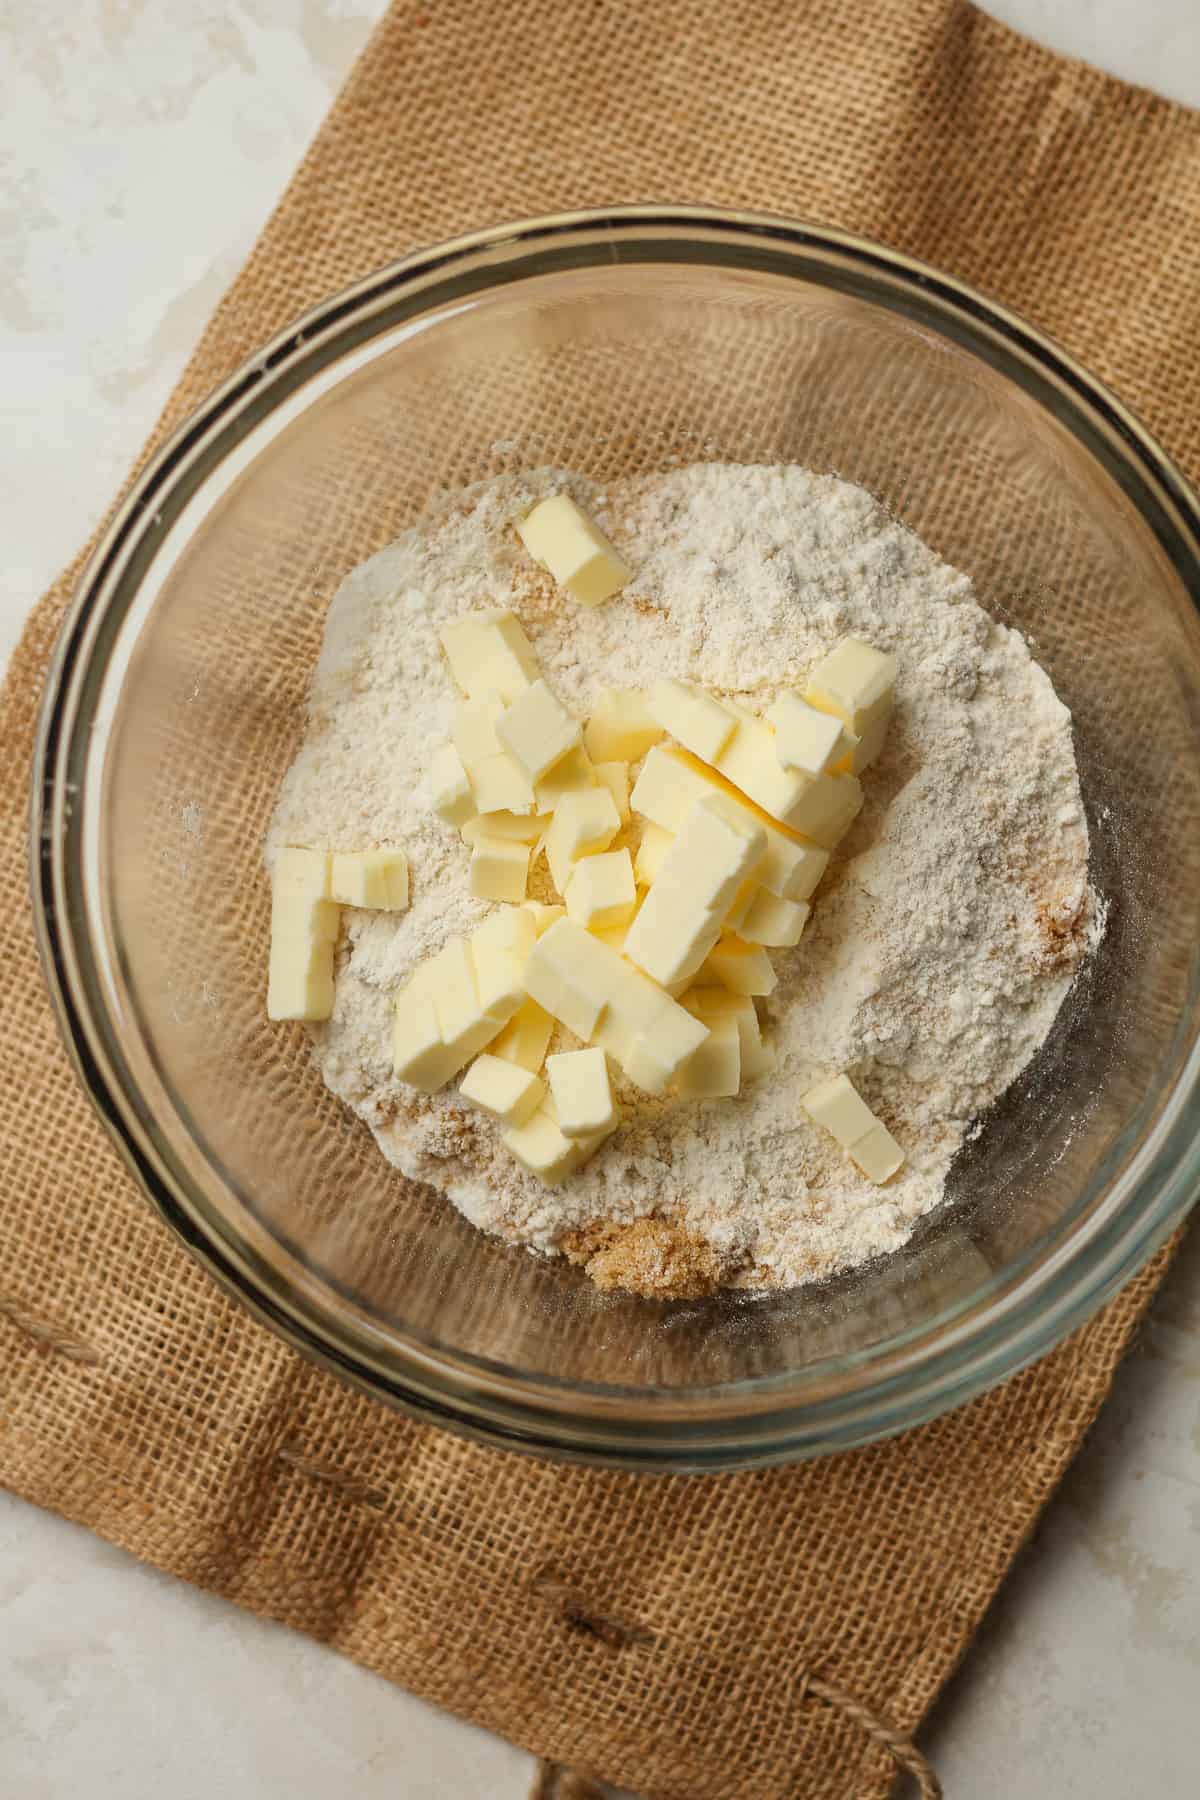 A bowl of the topping mixture with cubed butter.